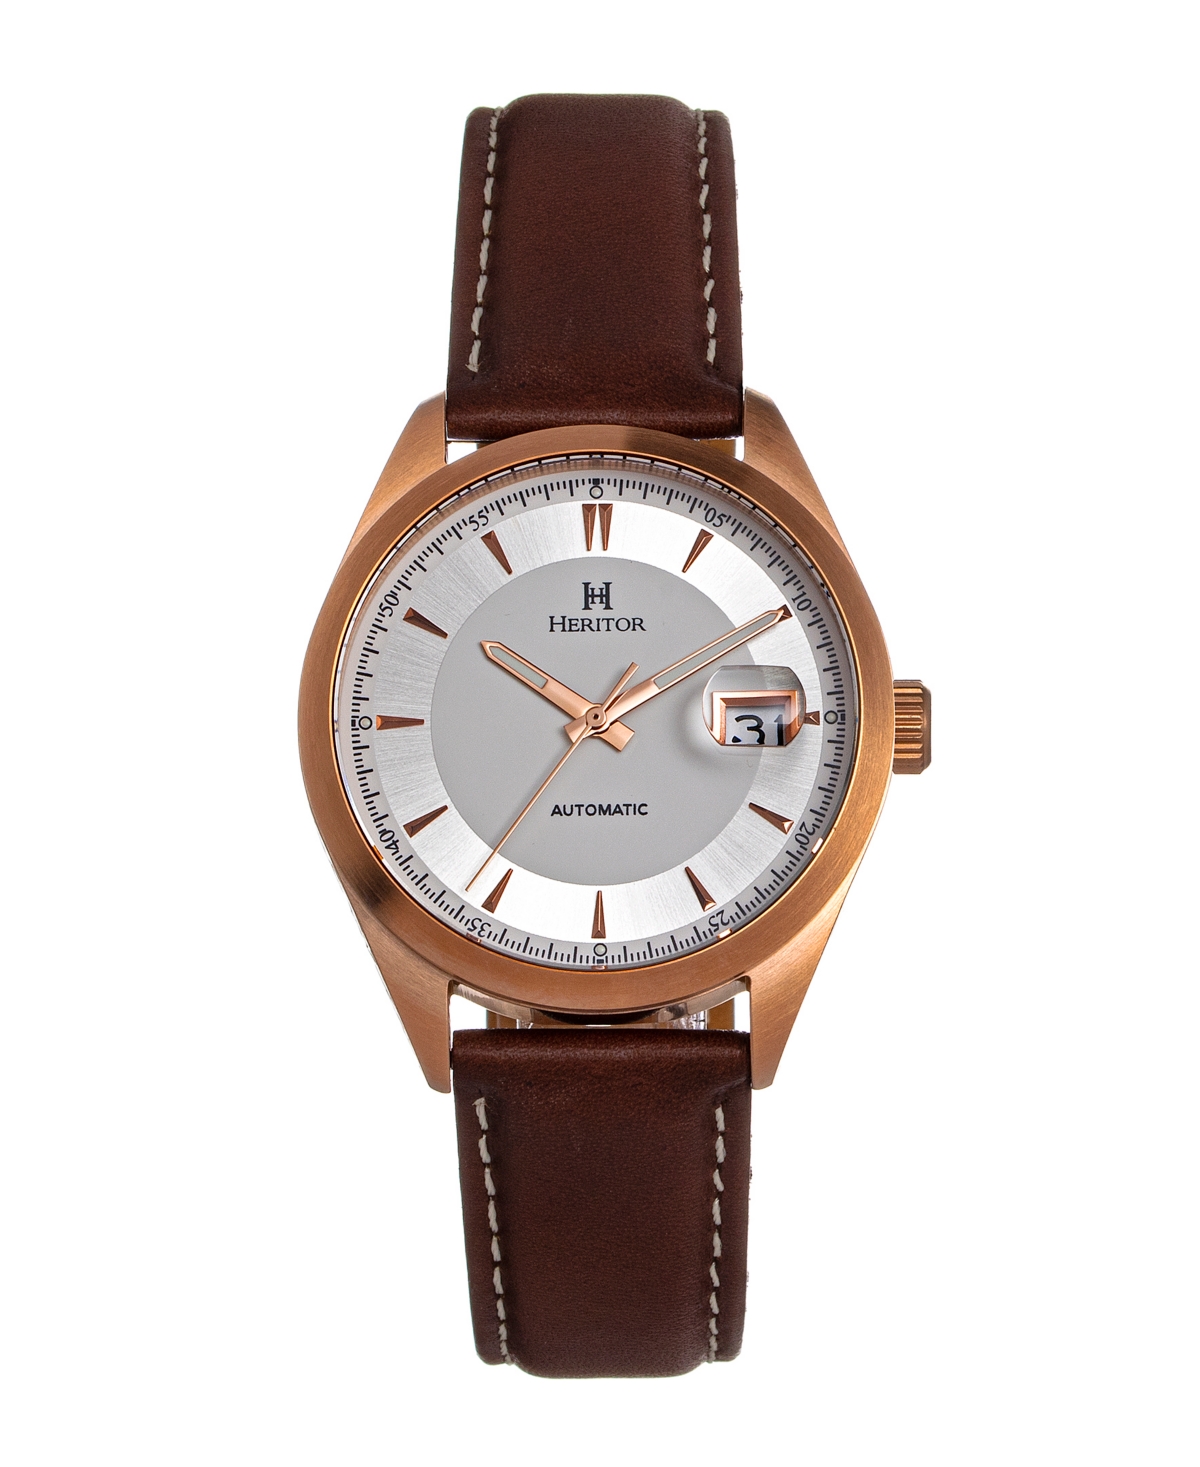 Heritor Automatic Ashton Beige or Black or Brown or Tan Genuine Leather Band Watch, 43mm